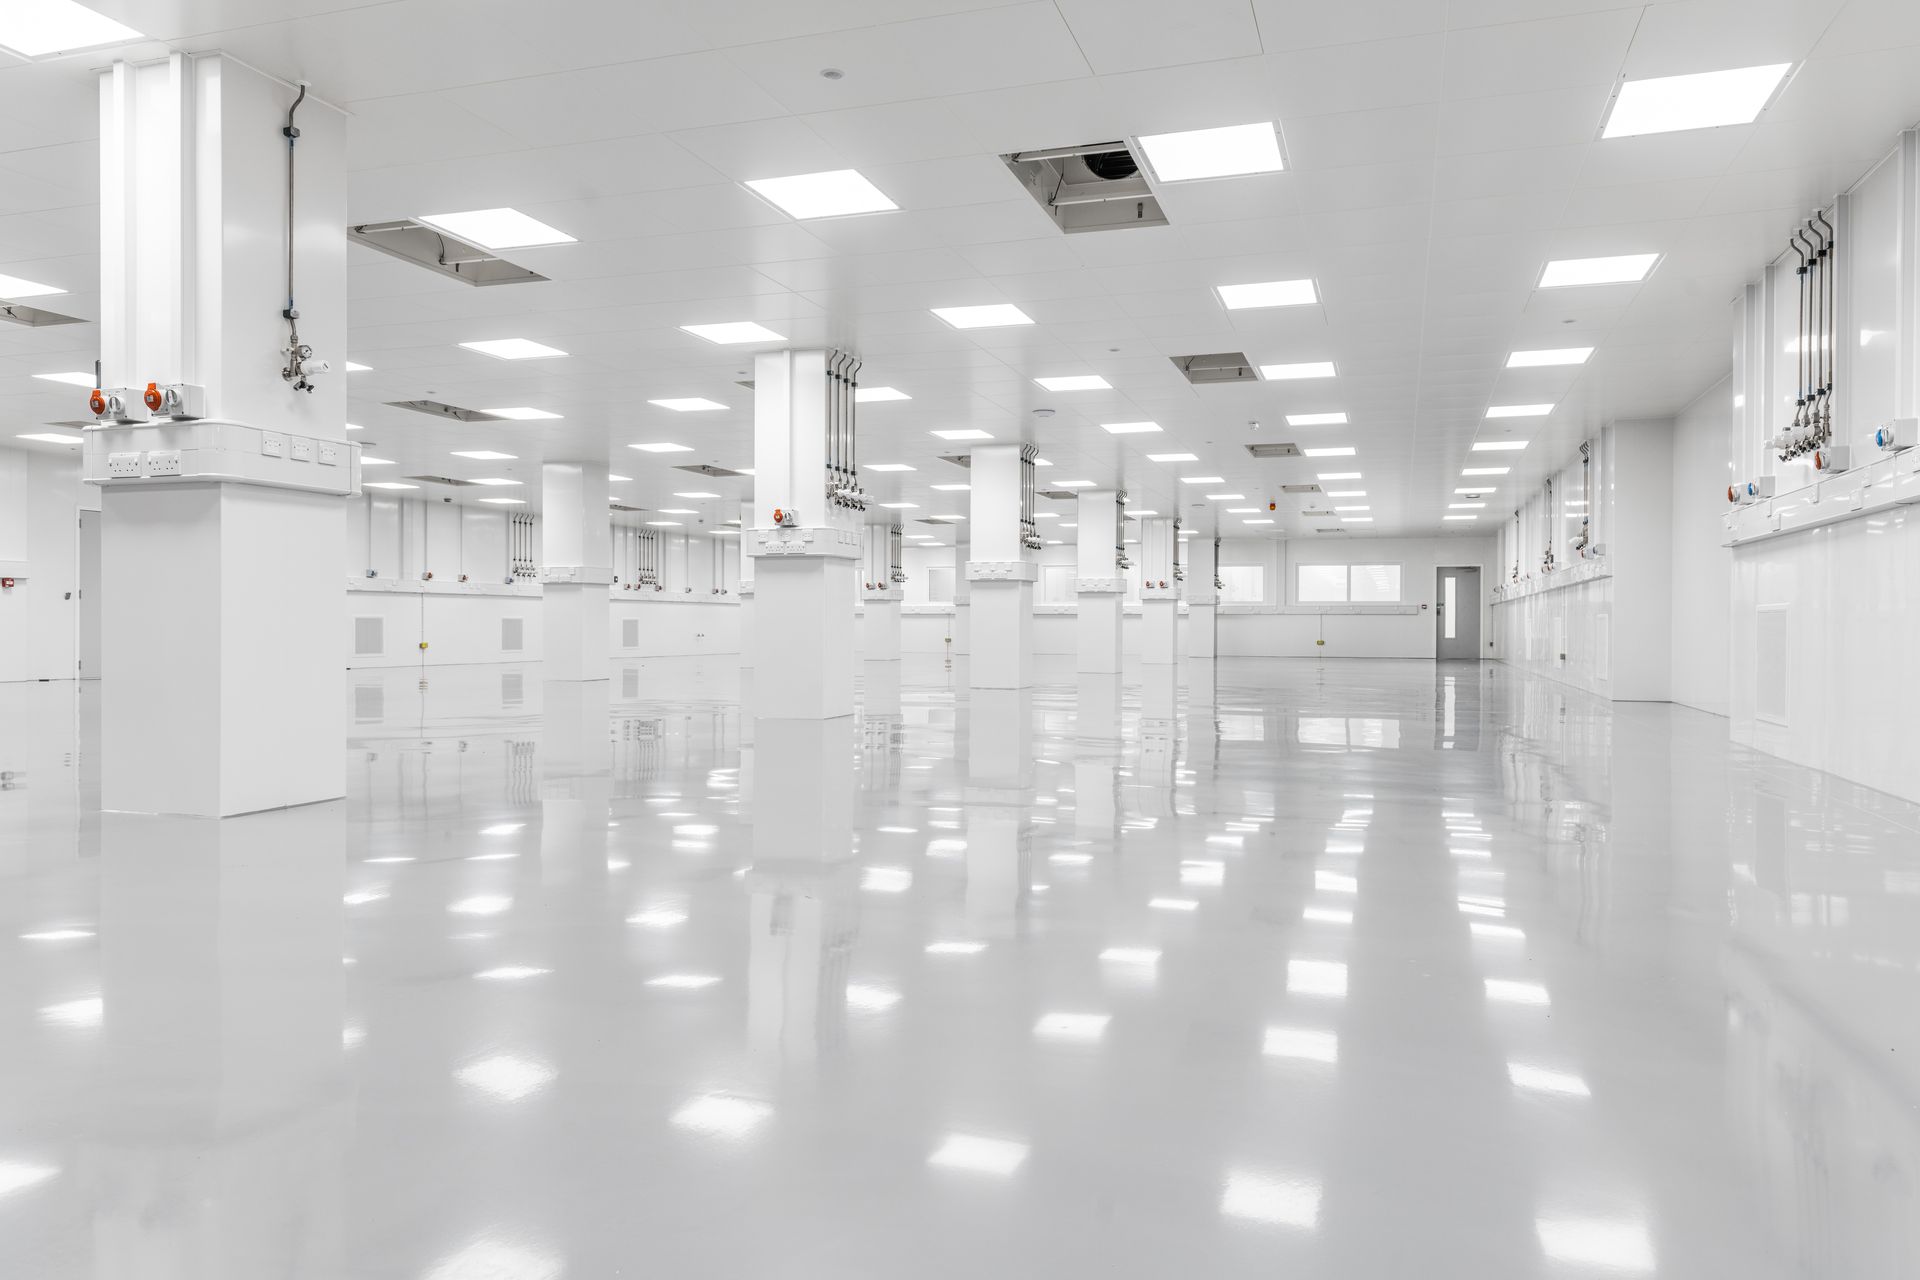 A large empty room with white walls and floors in a factory.